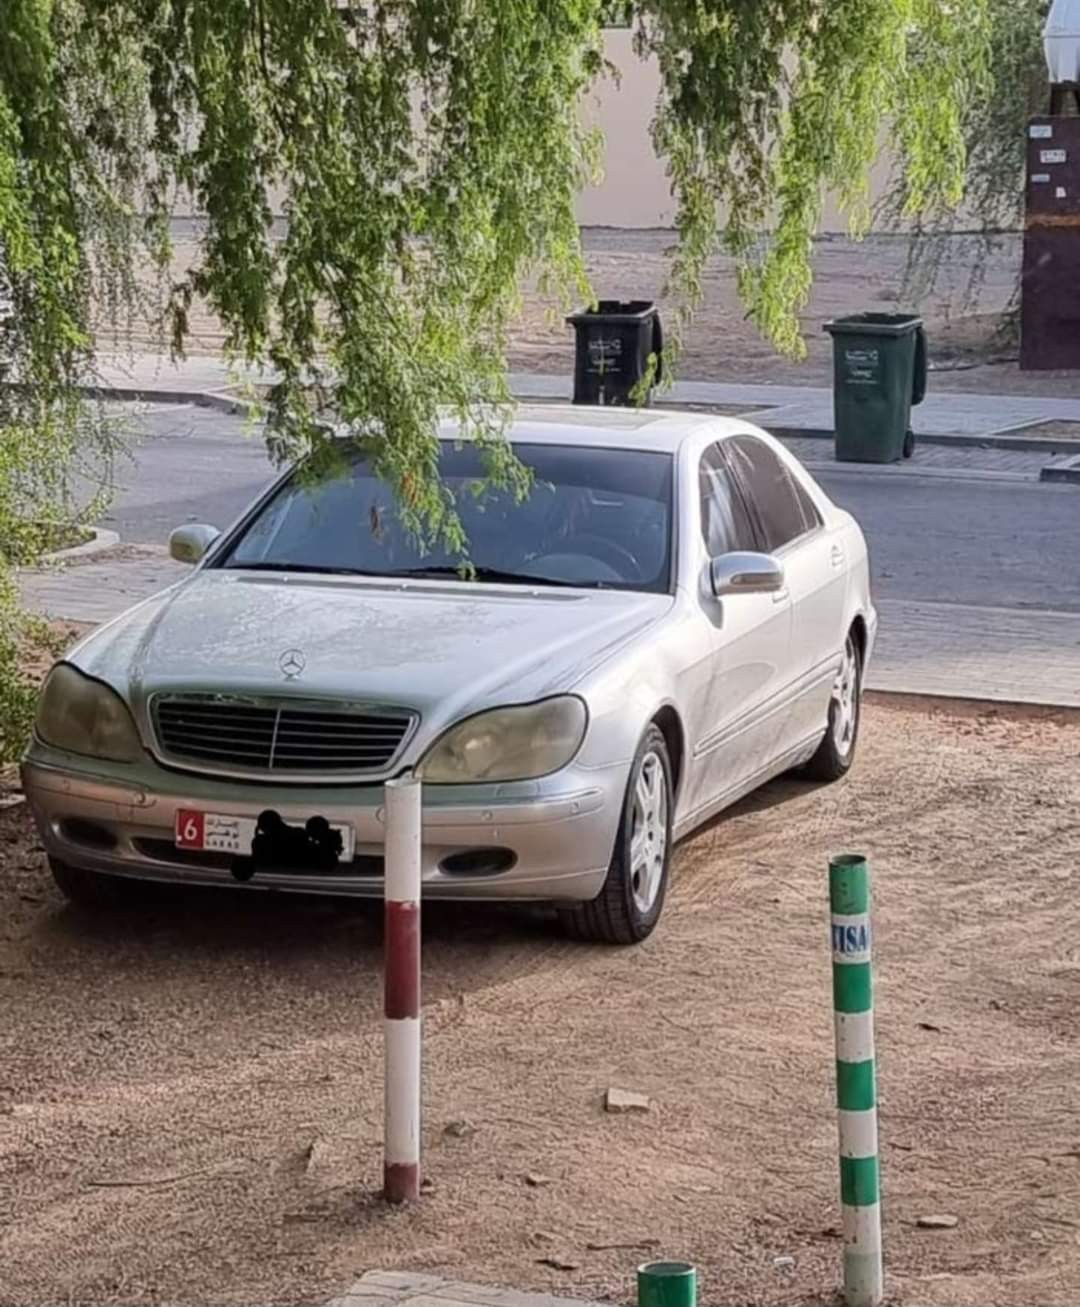 Mercedes car for sale in excellent condition-image